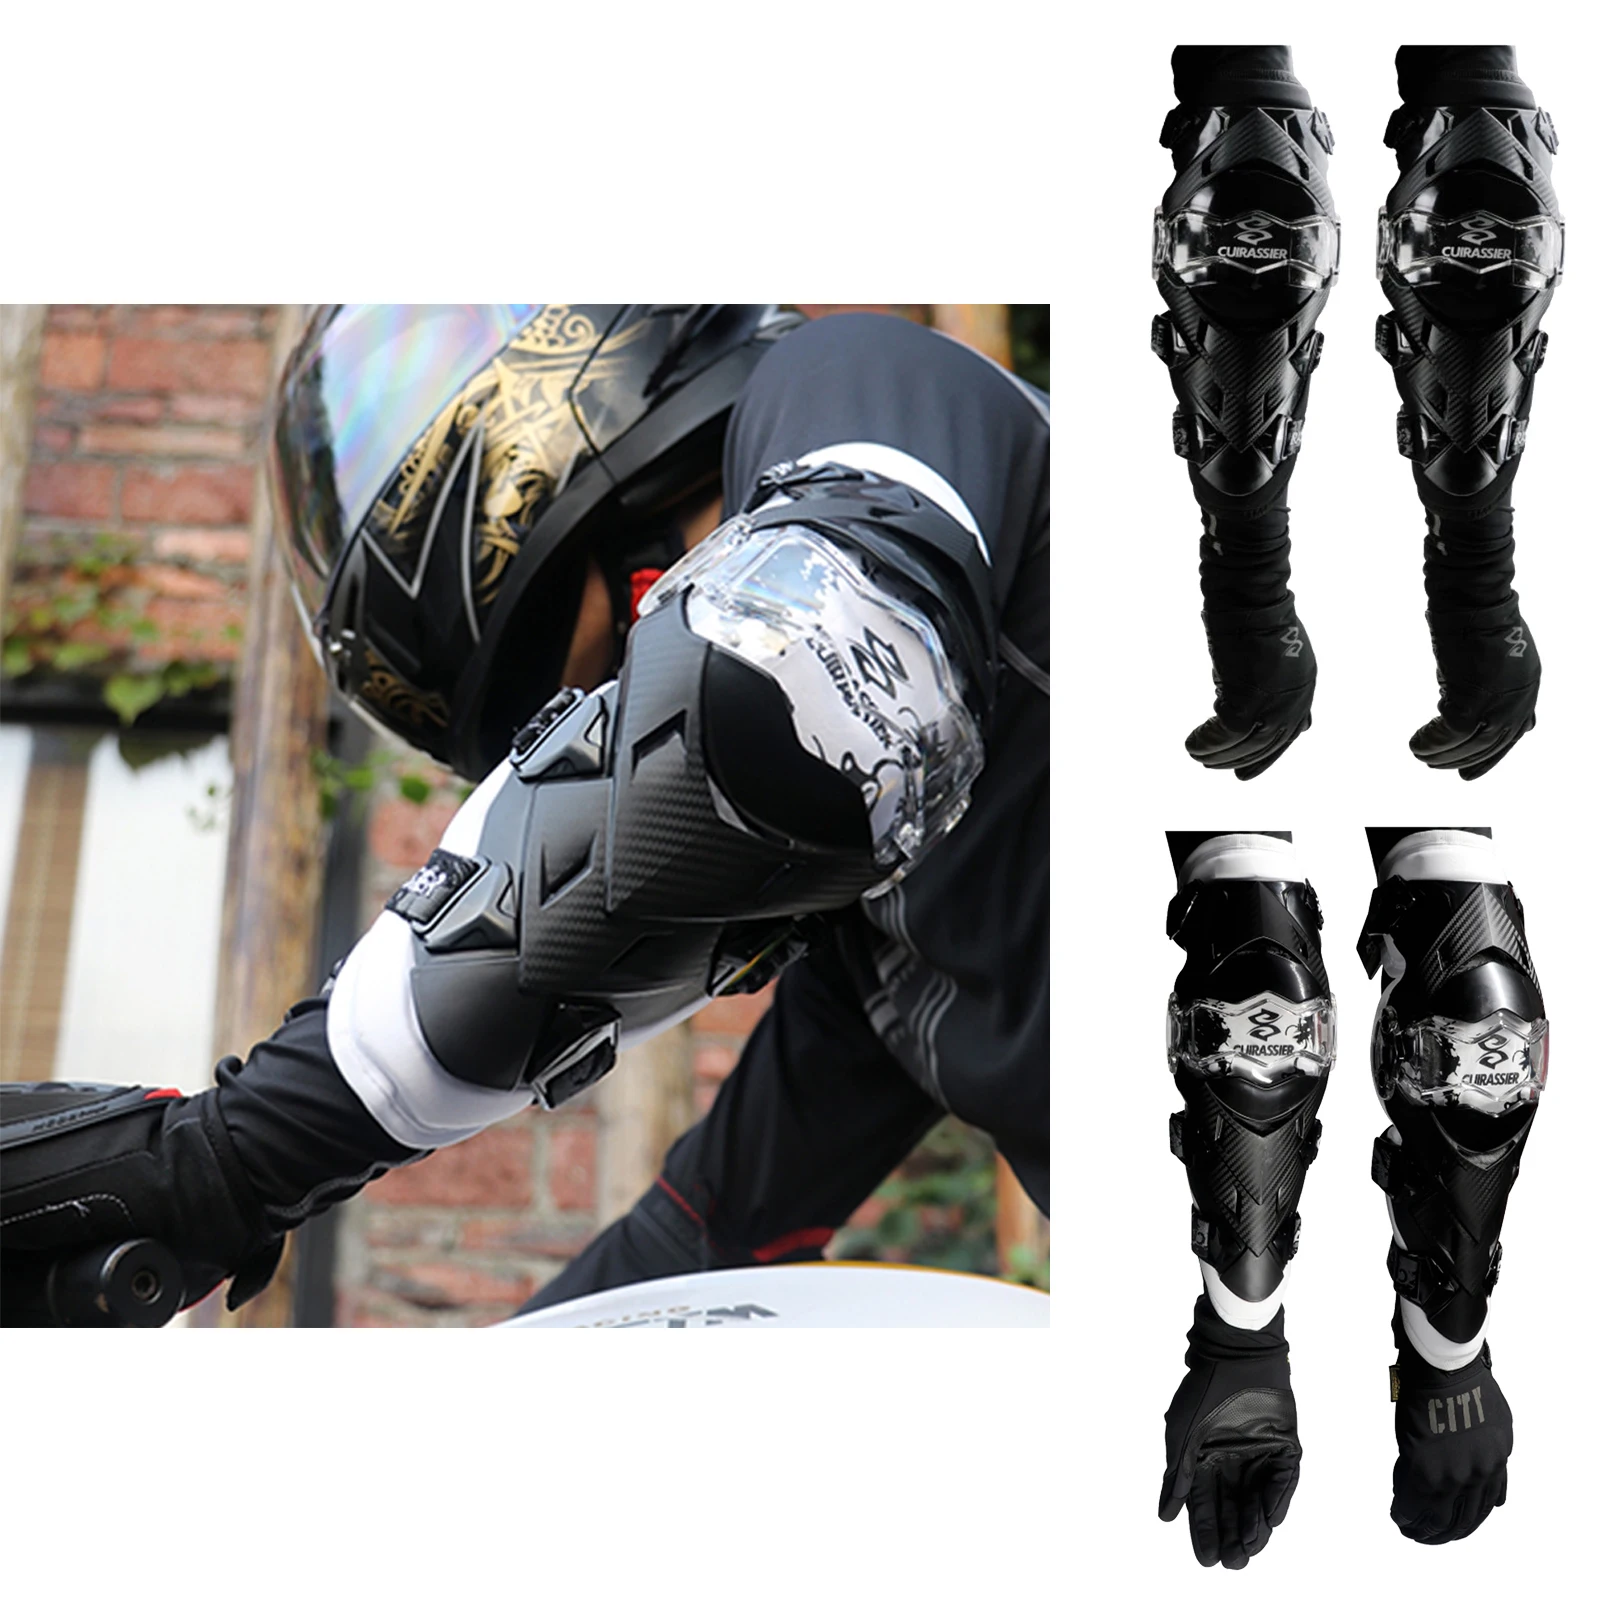 Cuirassier Elbow Pads E09 Motocross Protection Motorcycle MTB Off-Road Elbow